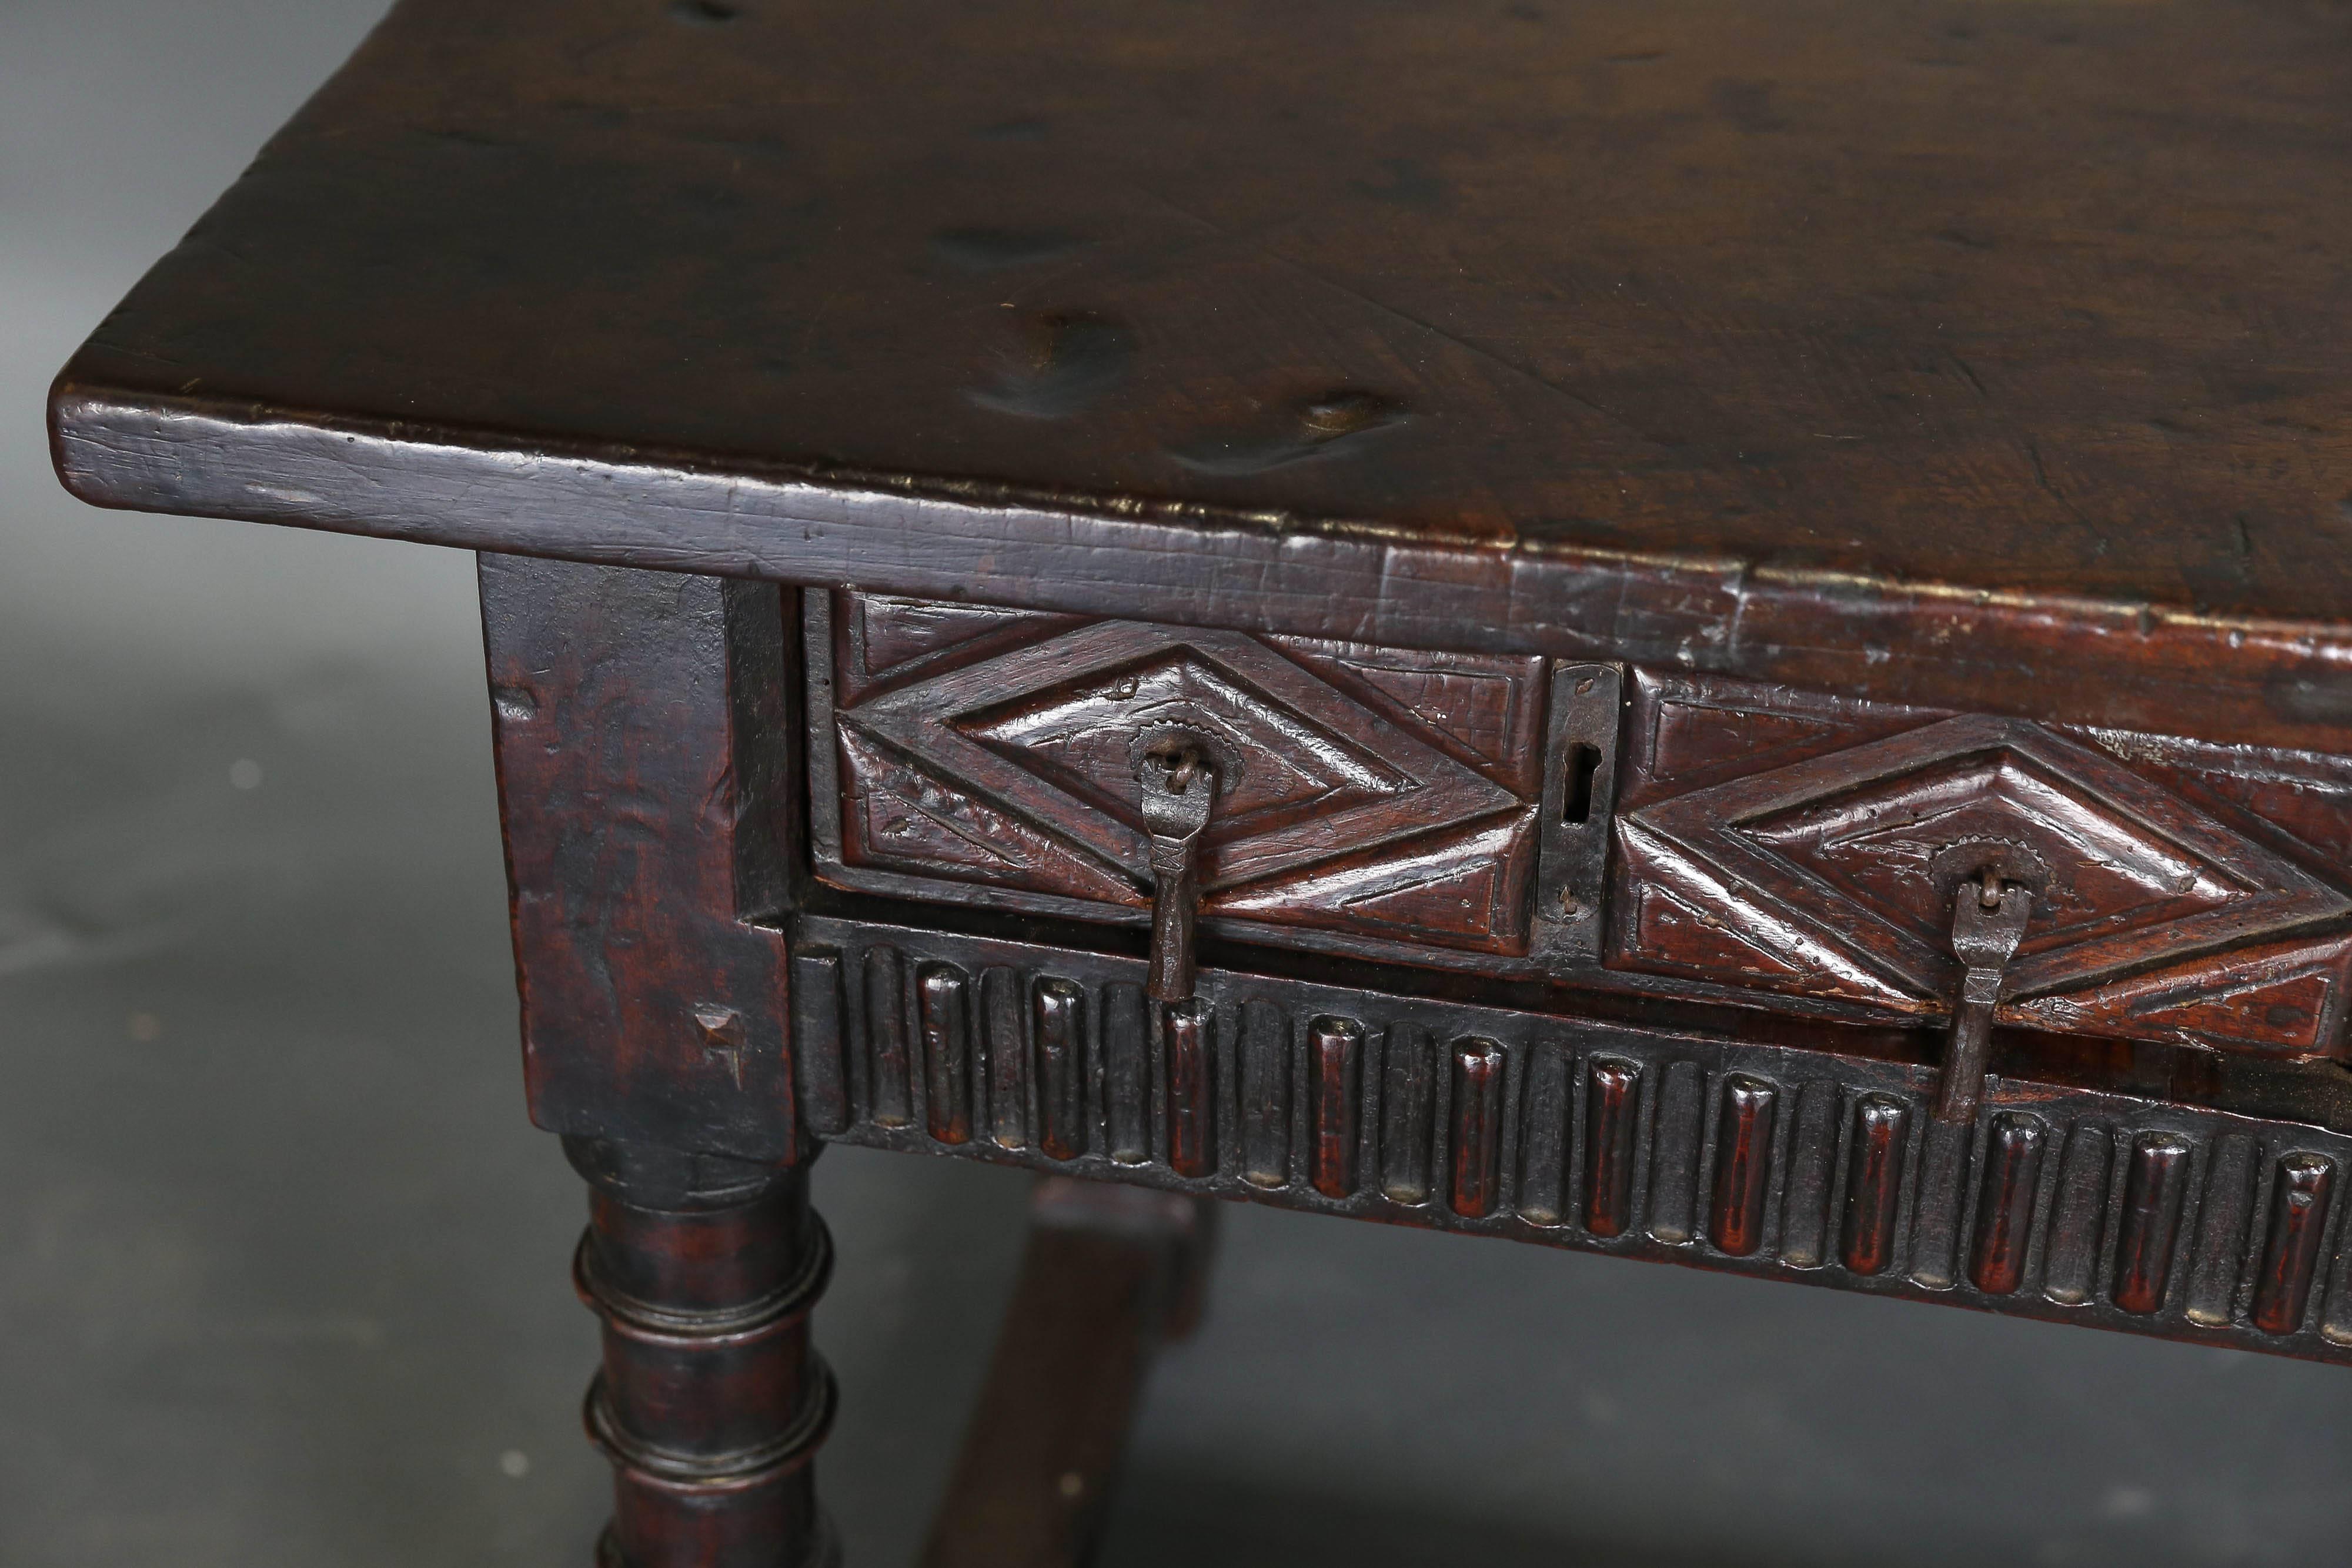 Antique 18th century Spanish console table with two carved drawers and a single plank top. Beautiful patina, architectural carving on drawers, original hardware and turned legs.